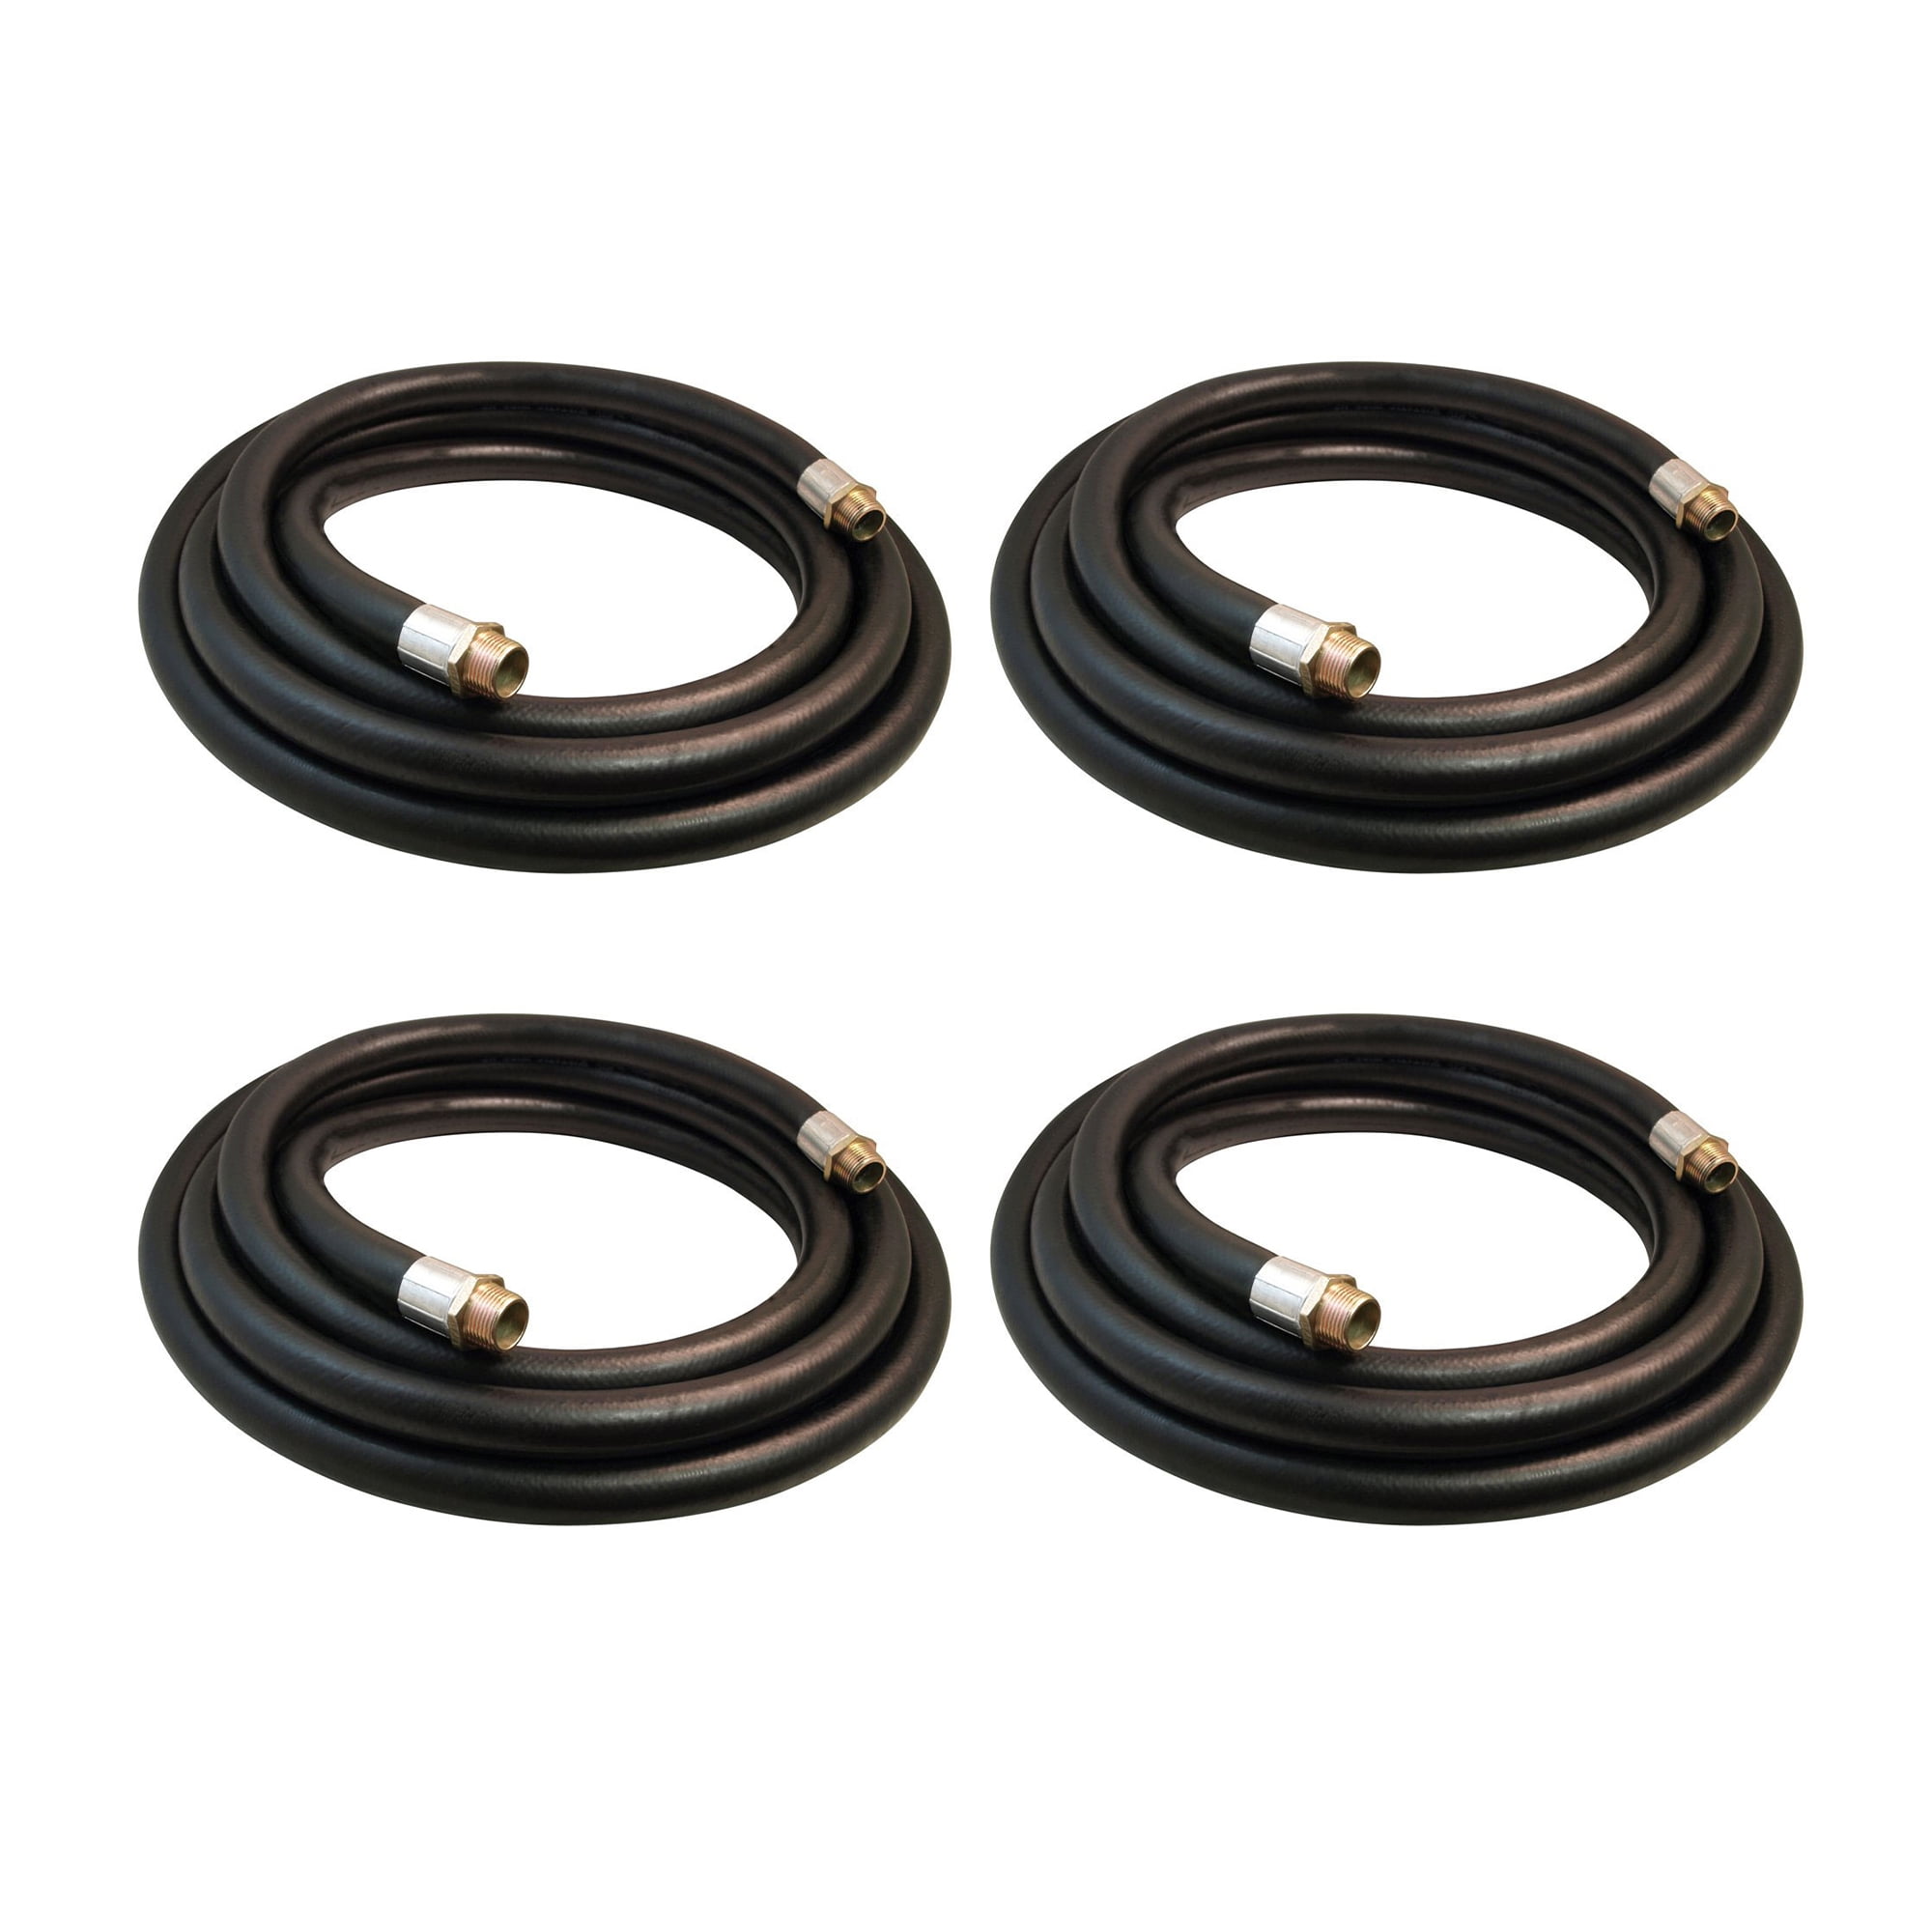 4 Pack Apache 1 Inch Diameter 20 Foot Length Farm Fuel Gasoline Oil Diesel Tractor Transfer Hoses for Personal and Professional Use Black 